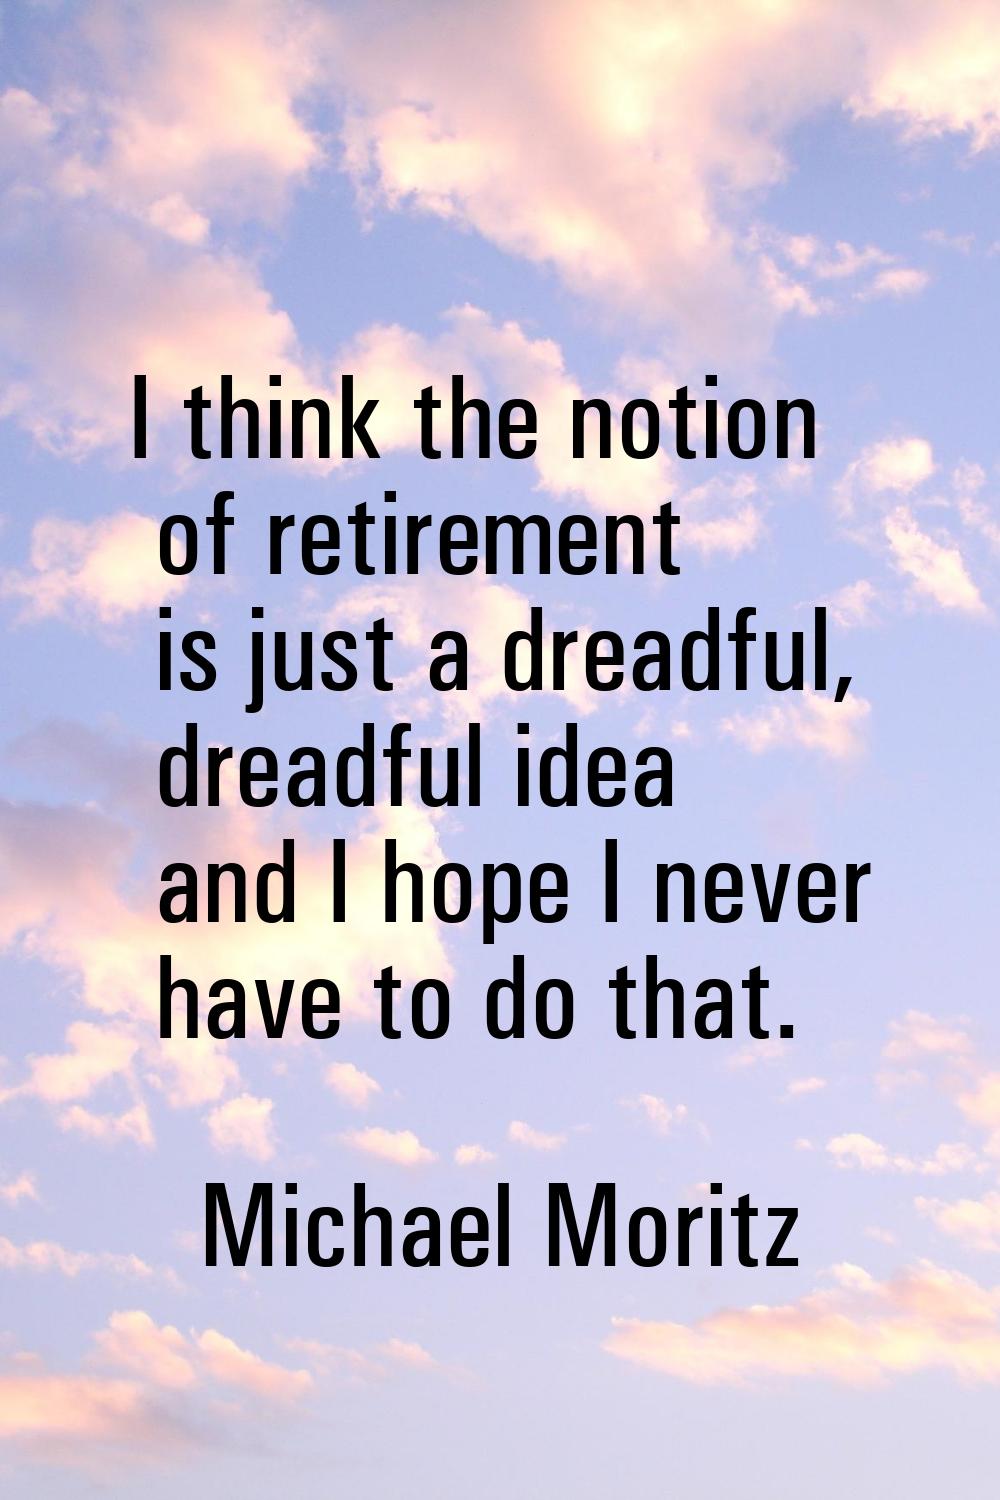 I think the notion of retirement is just a dreadful, dreadful idea and I hope I never have to do th